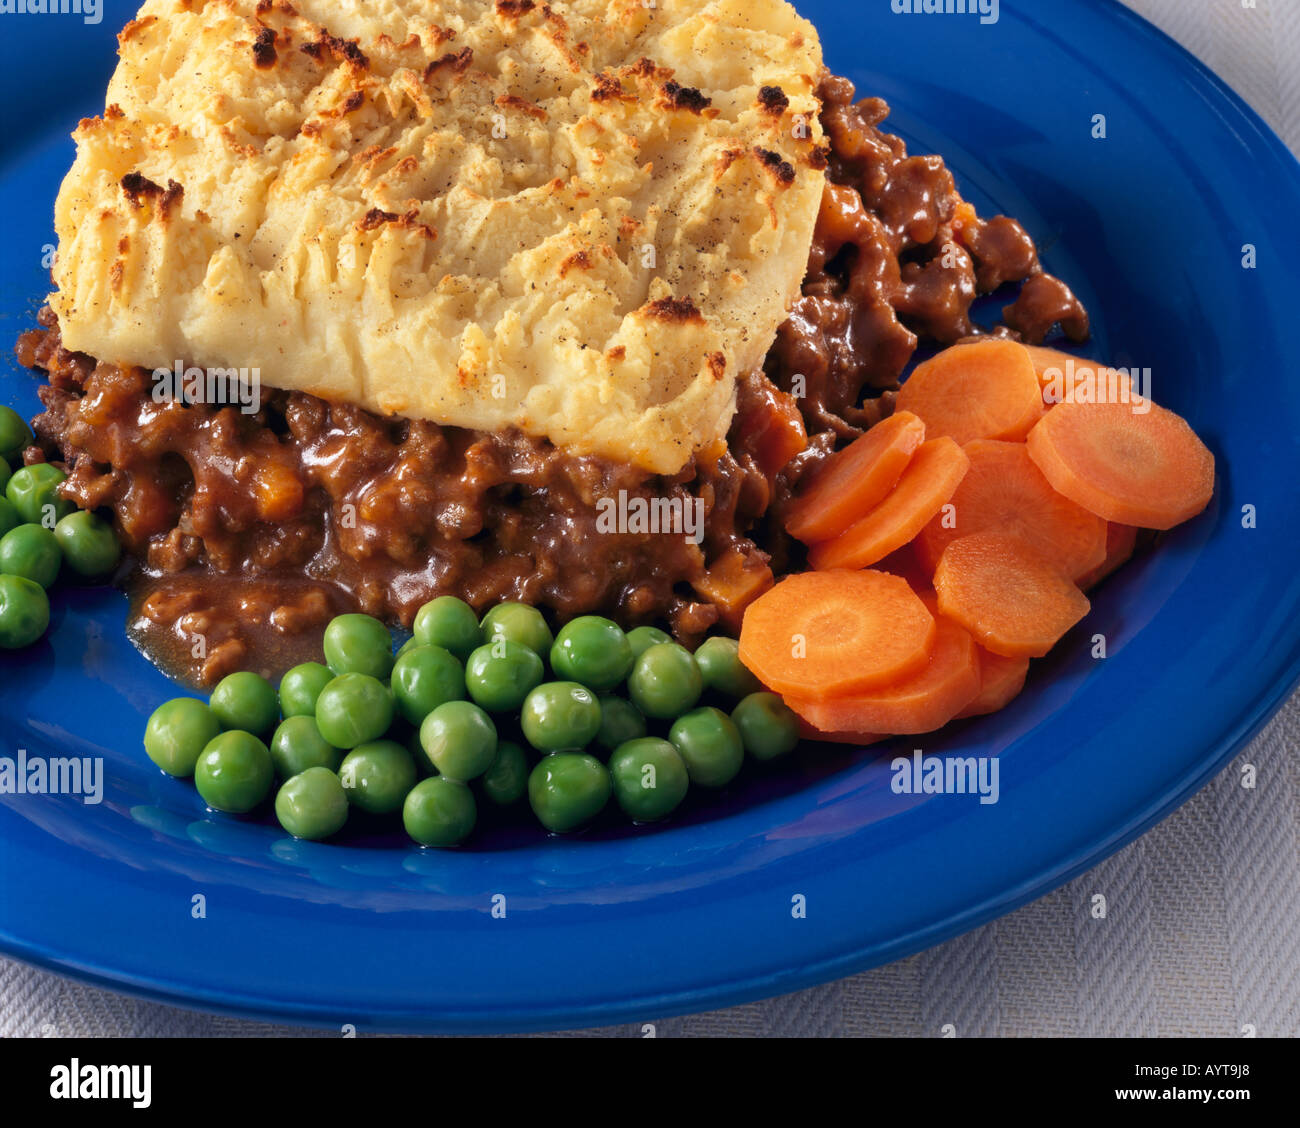 Cottage Or Shepherds Pie Carrots And Peas Stock Photo 9814759 Alamy